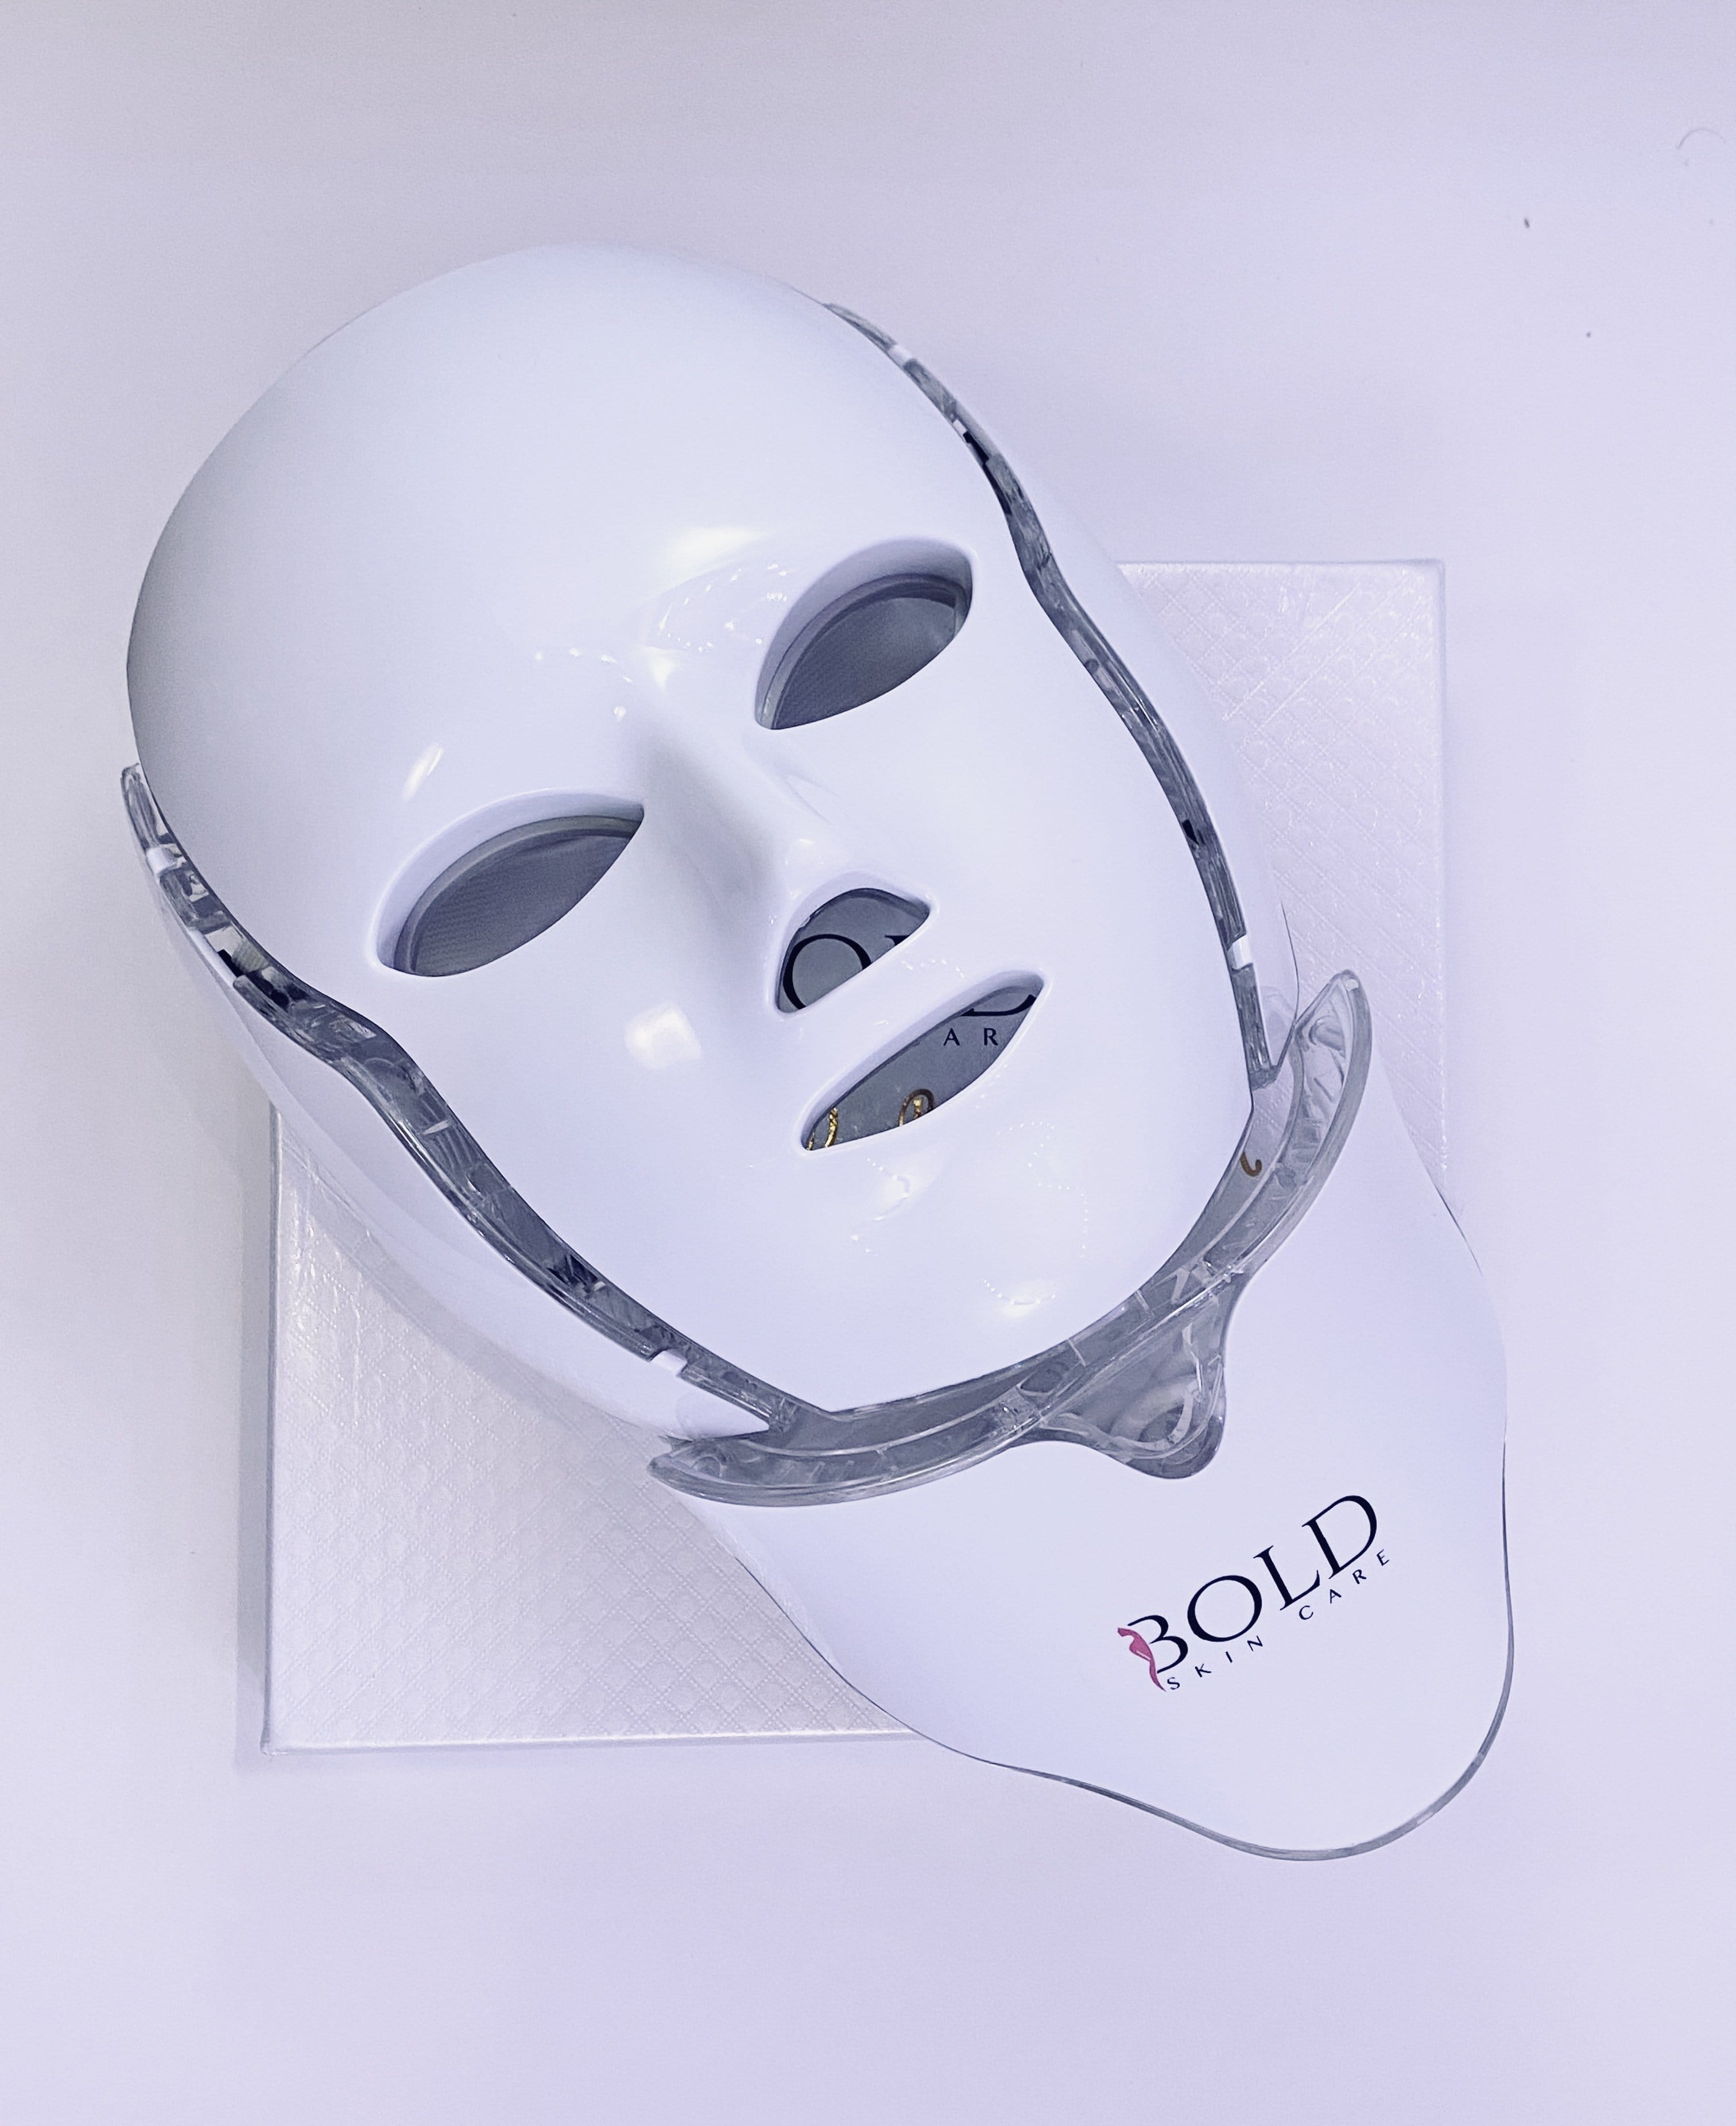 Bold Skincare 7 Color LED Light Therapy Mask for Face & Neck